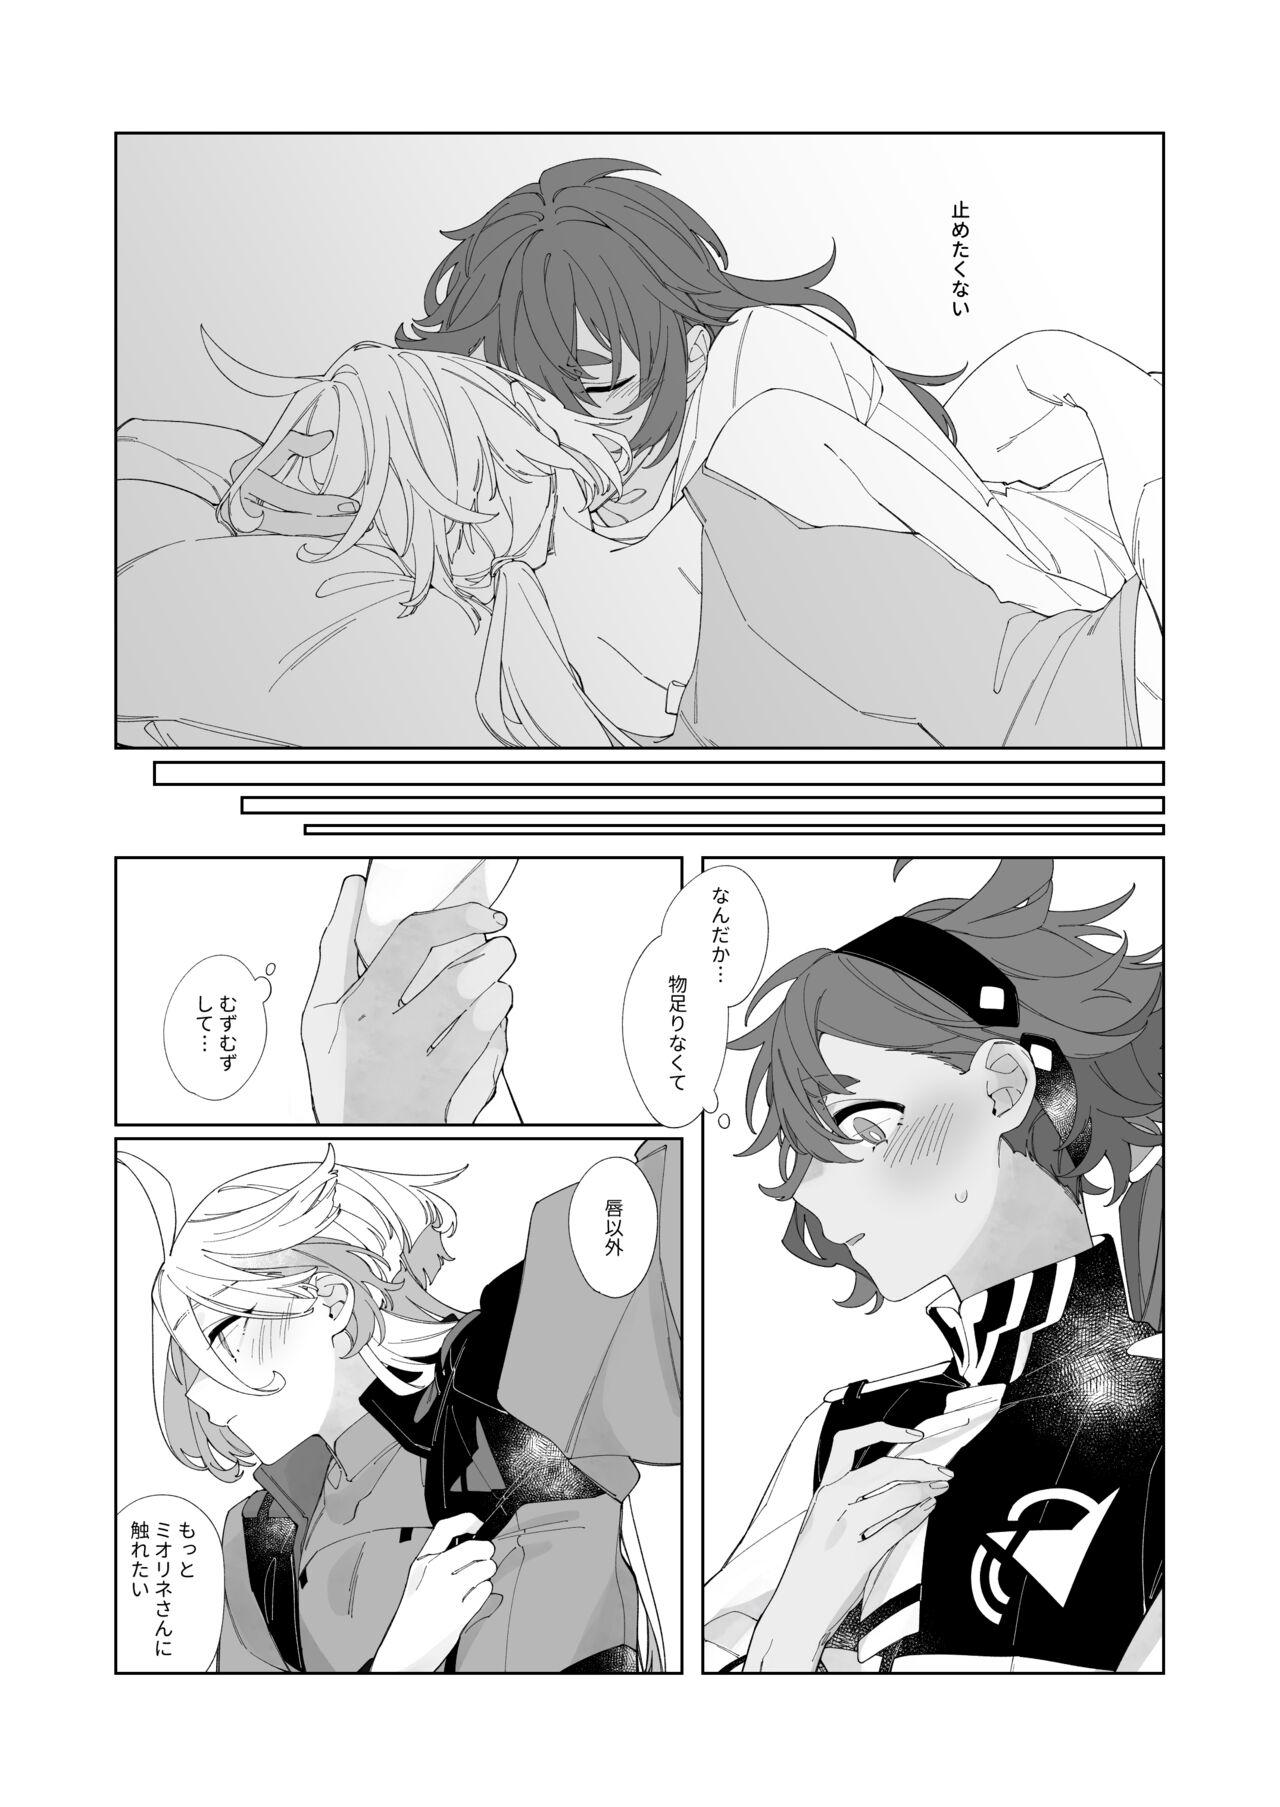 Banho Kiss no Ato Nani ga Shitai? - After kissing, what else do you want to do? - Mobile suit gundam the witch from mercury Thong - Page 10